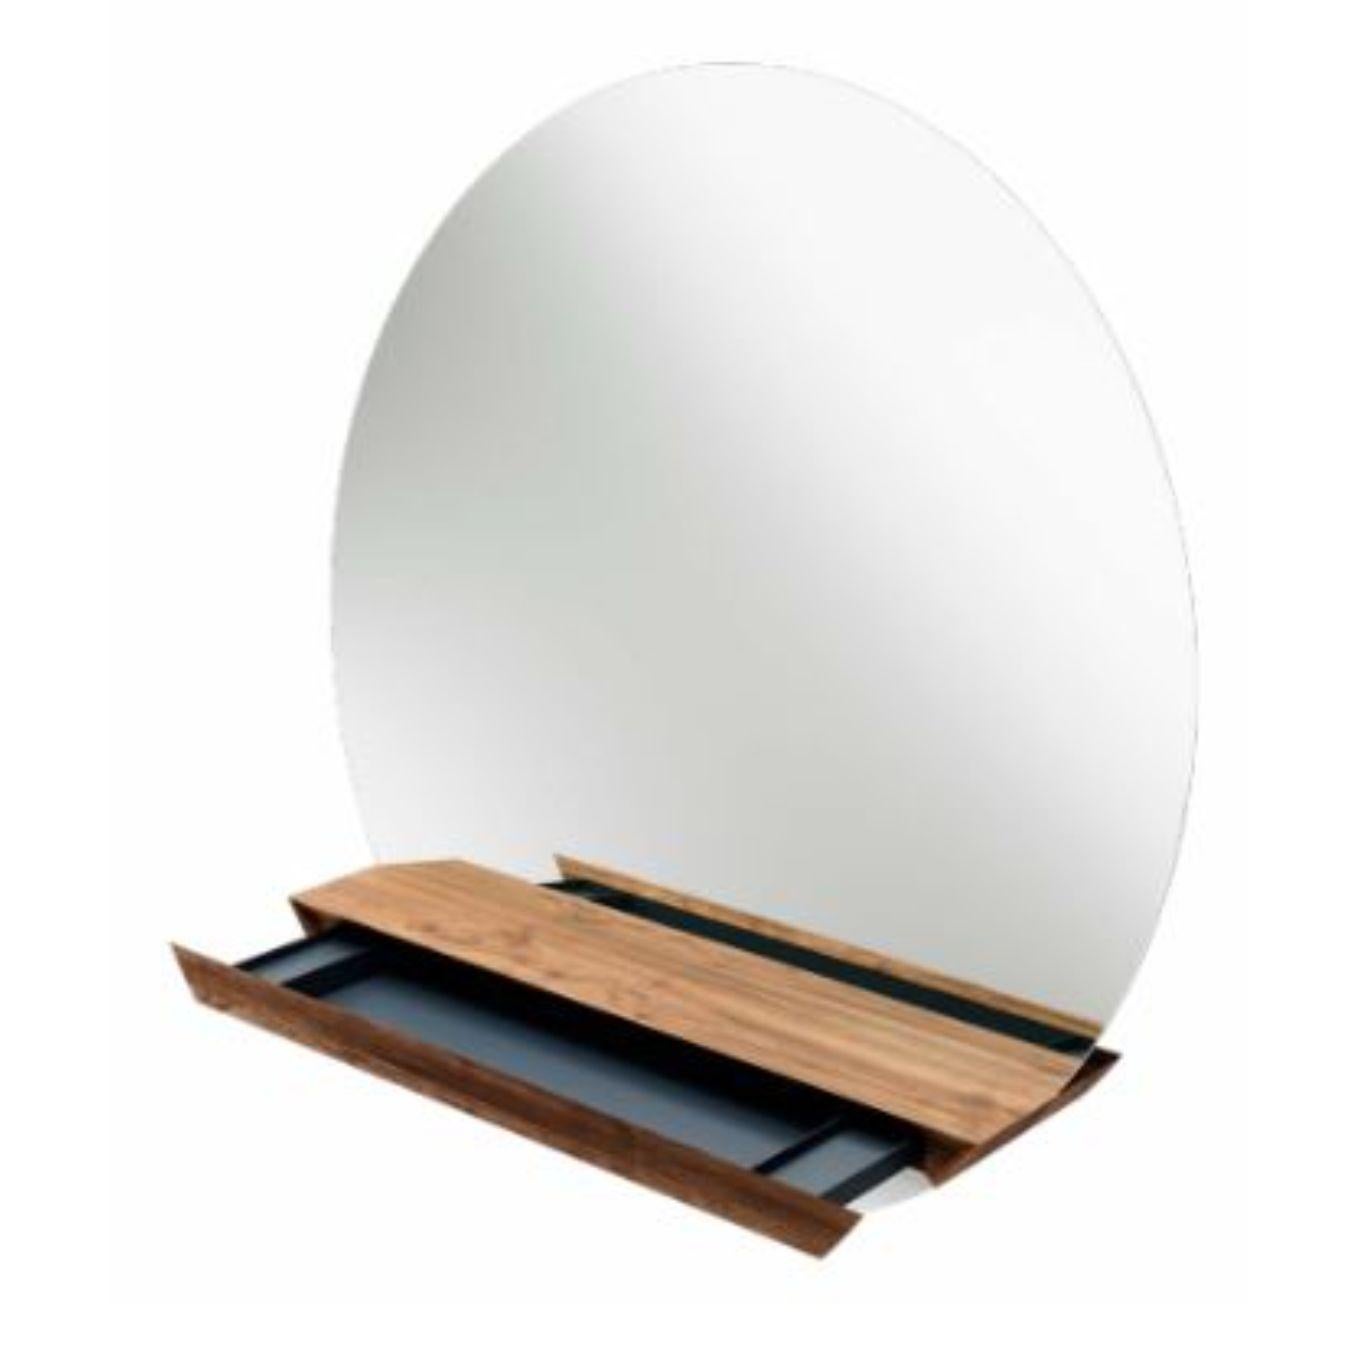 Oak round guillotine mirror by Jeffrey Huyghe.
Dimensions: D 30 x W 149.5 x H 149.5 cm.
Materials: Oak natural oiled, mirror.
Also available in different materials. 
 
Guillotine is designed with the IDEA in mind to keep your hallway clean and